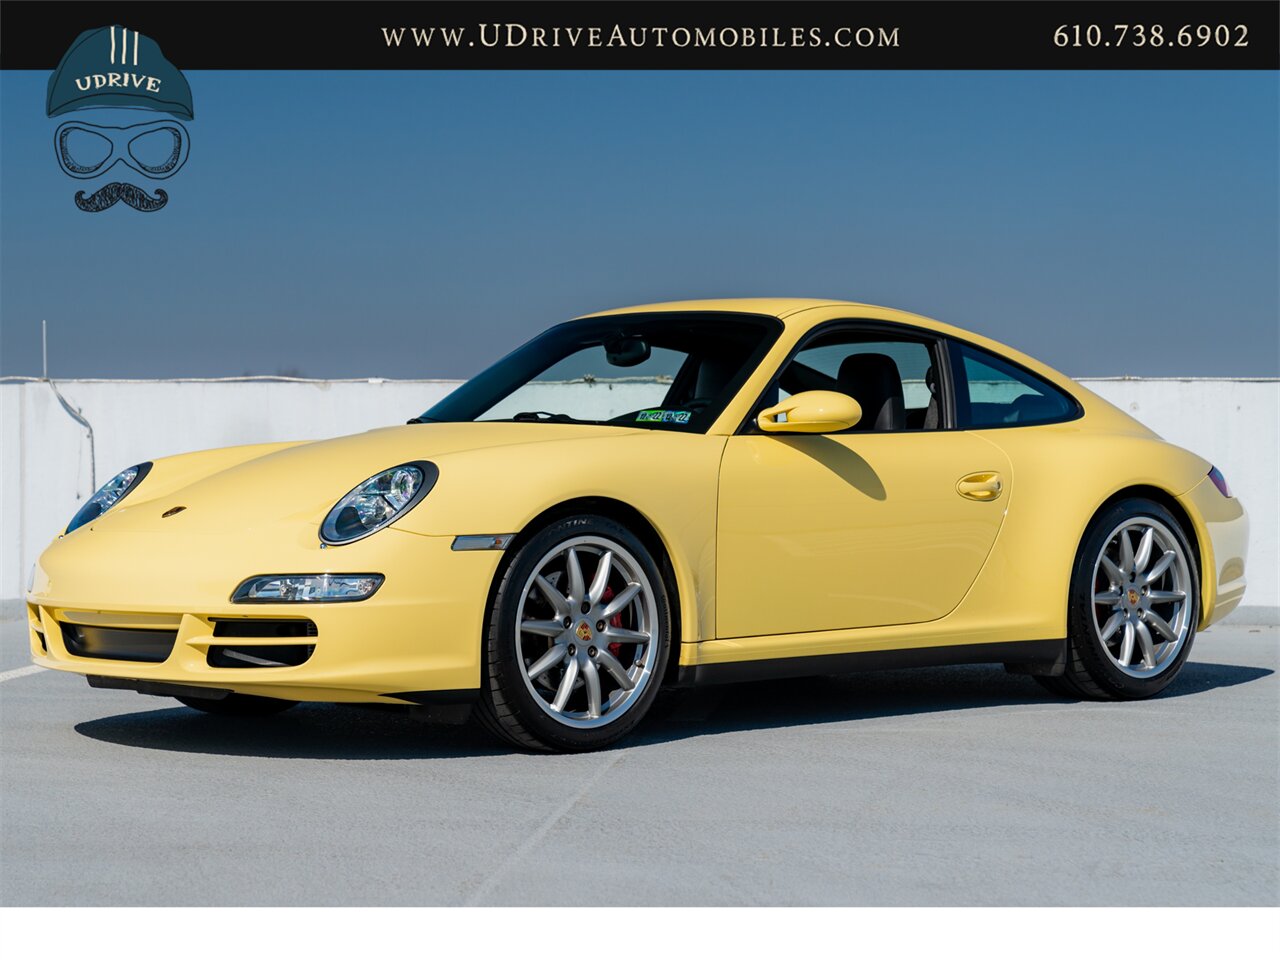 2007 Porsche 911 Carrera 4S 997 C4S Paint To Sample Pastel Yellow  6 Speed Sport Chrono Full Leather Yellow Gauges - Photo 10 - West Chester, PA 19382